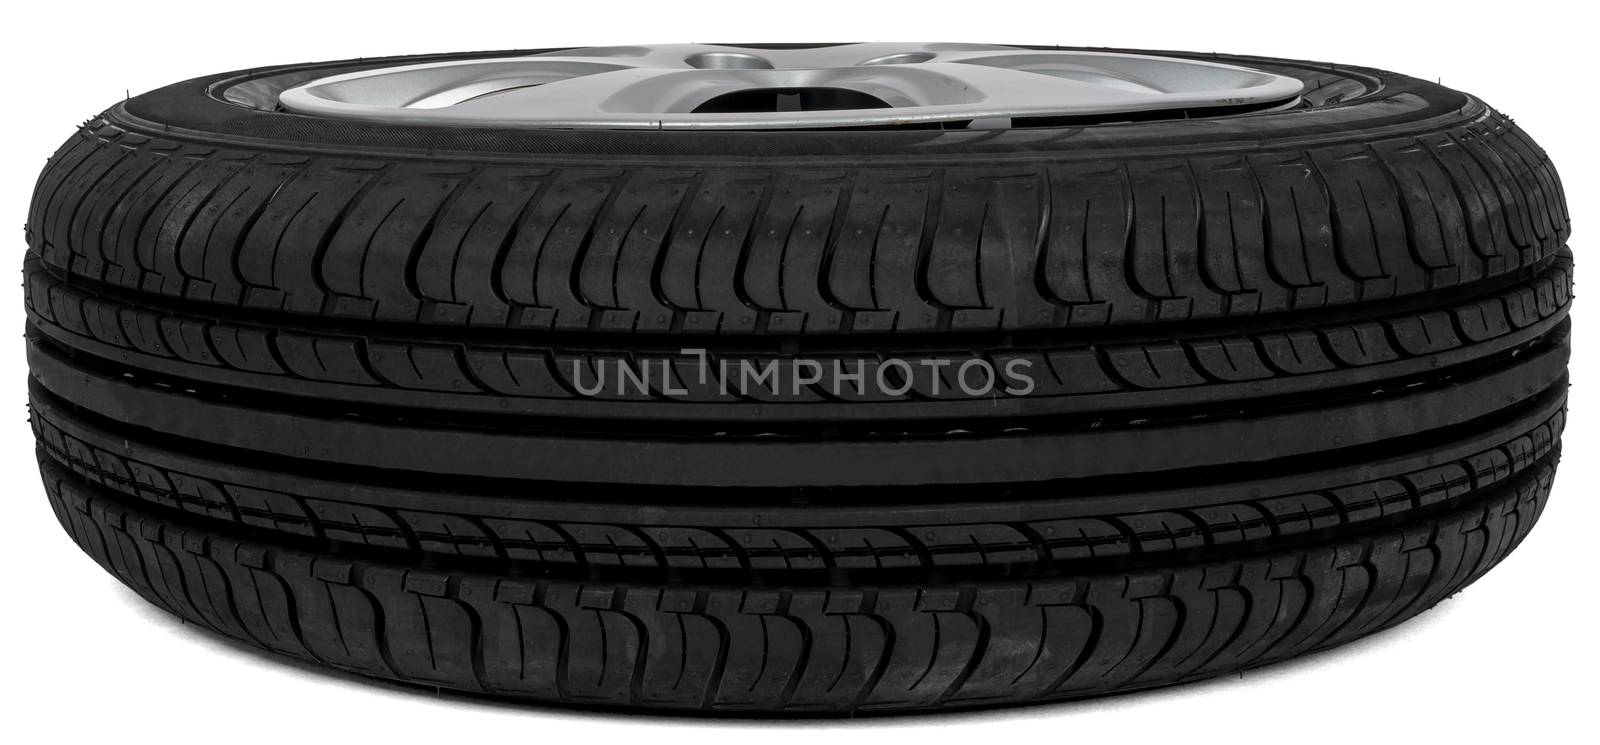 Car tire, isolated on white background. Perspective view